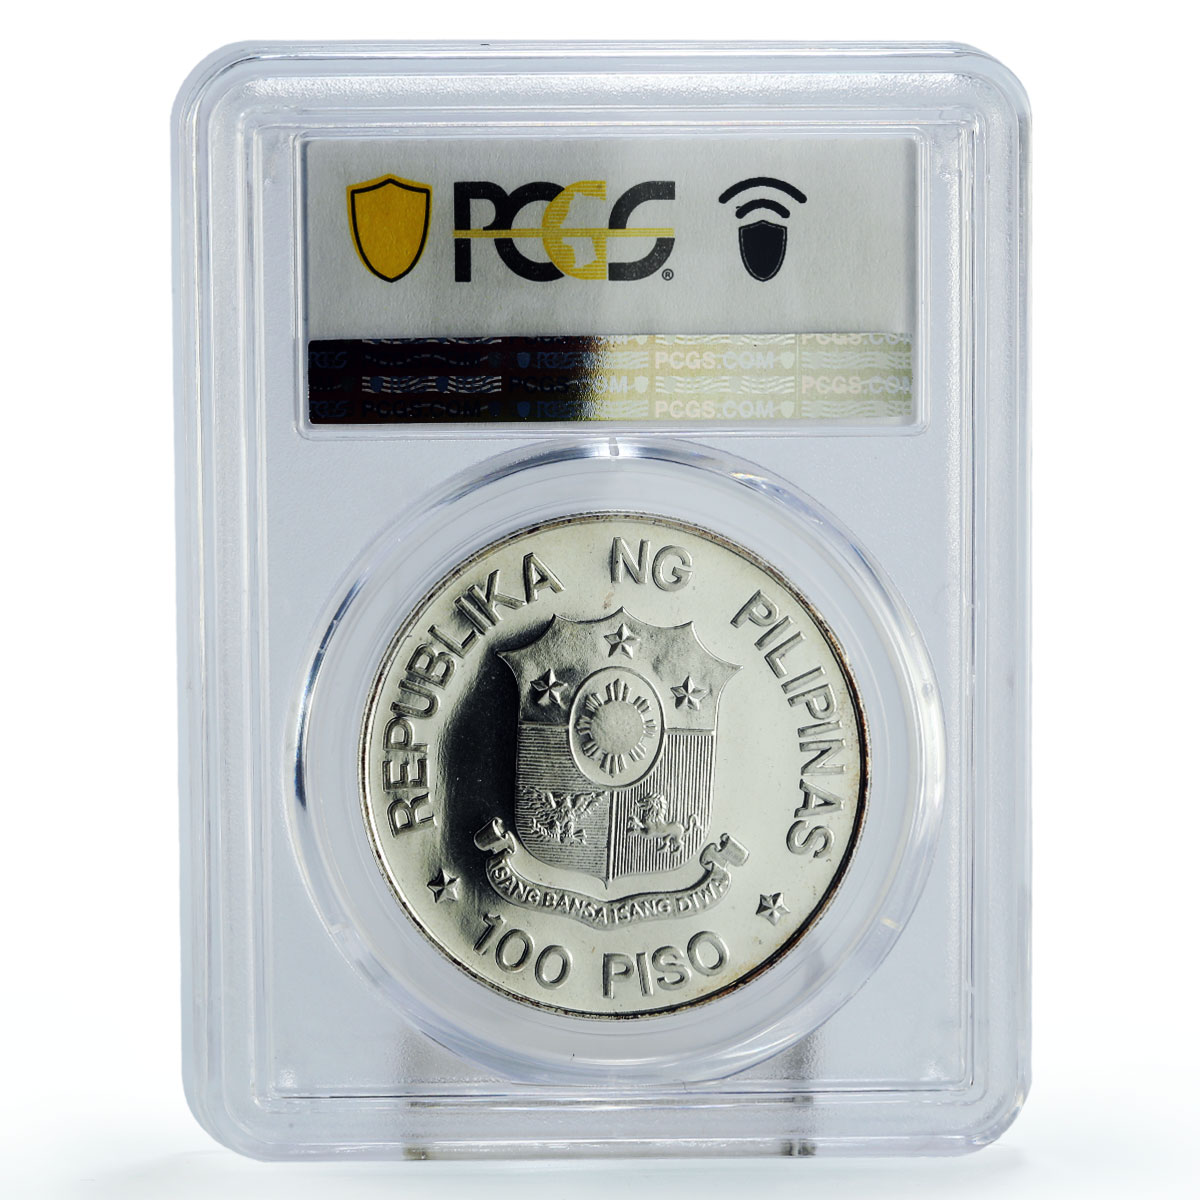 Philippines 100 piso 75th Anniversary of University MS68 PCGS silver coin 1983